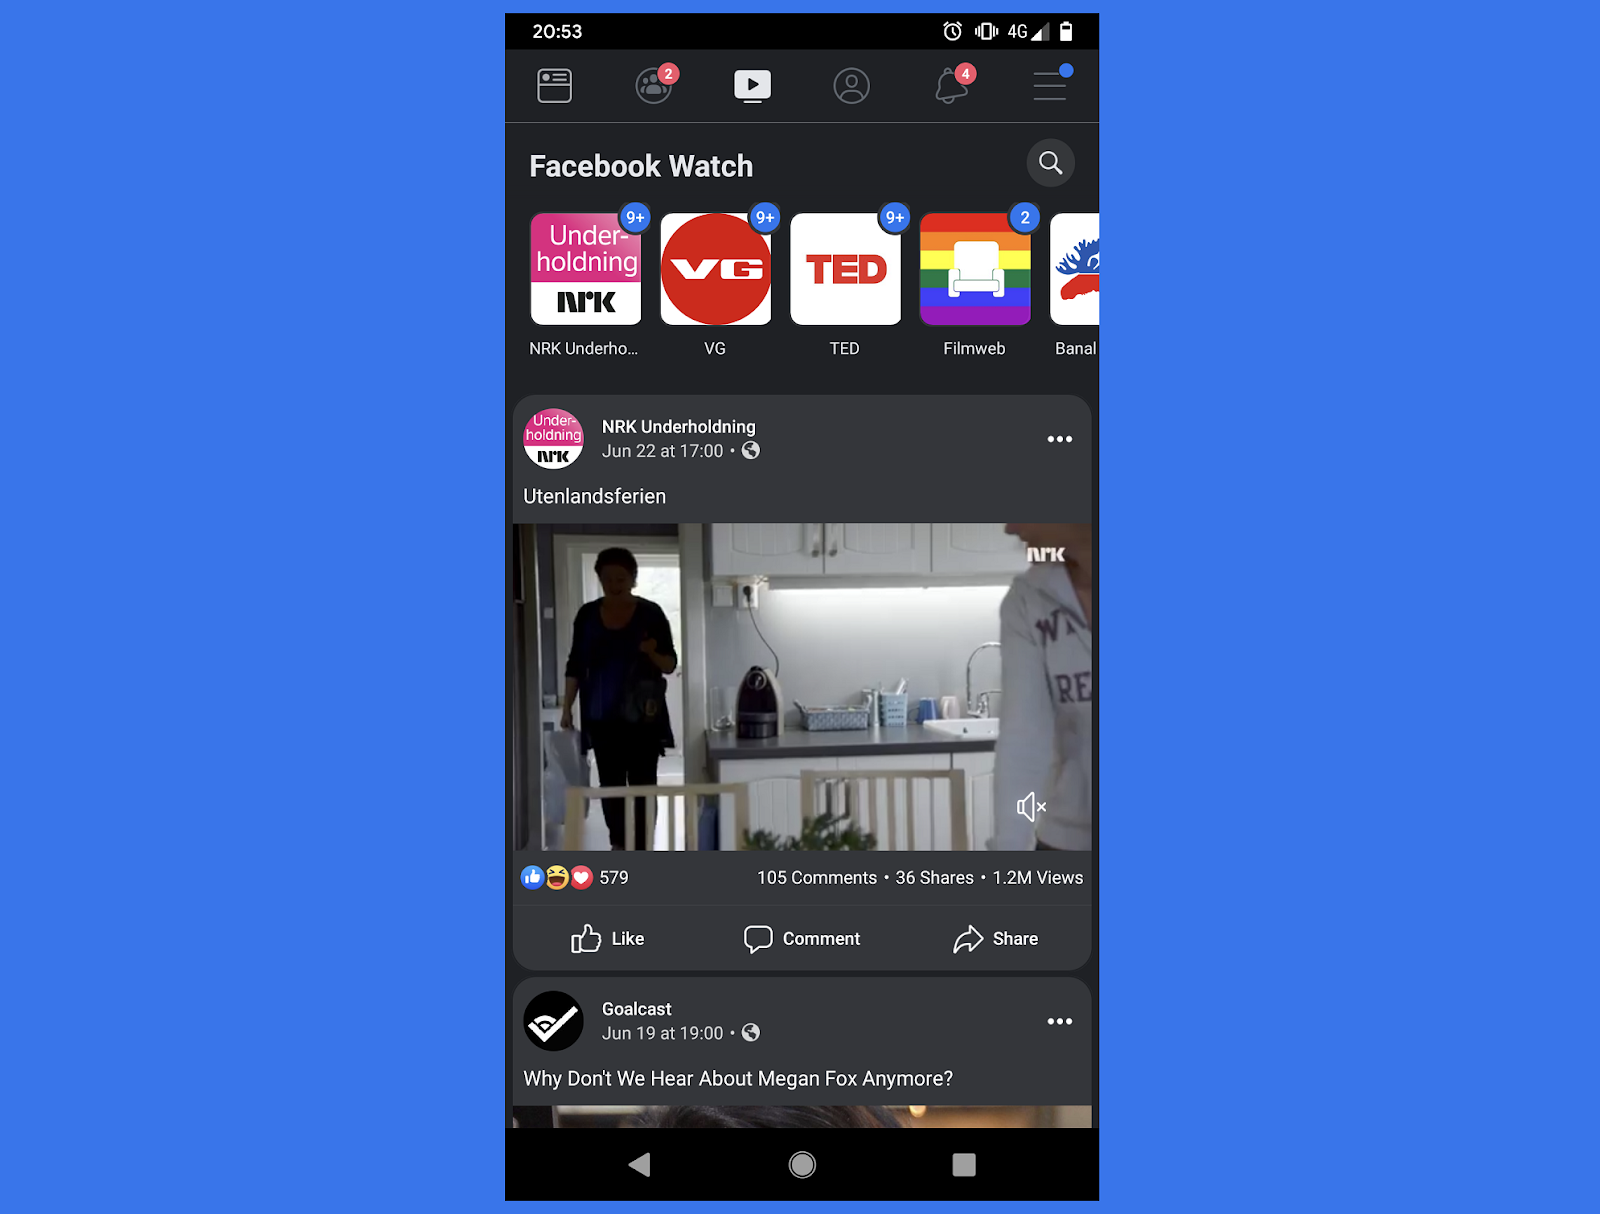 Android Users Will Soon Experience Facebook Dark Mode On Their Devices